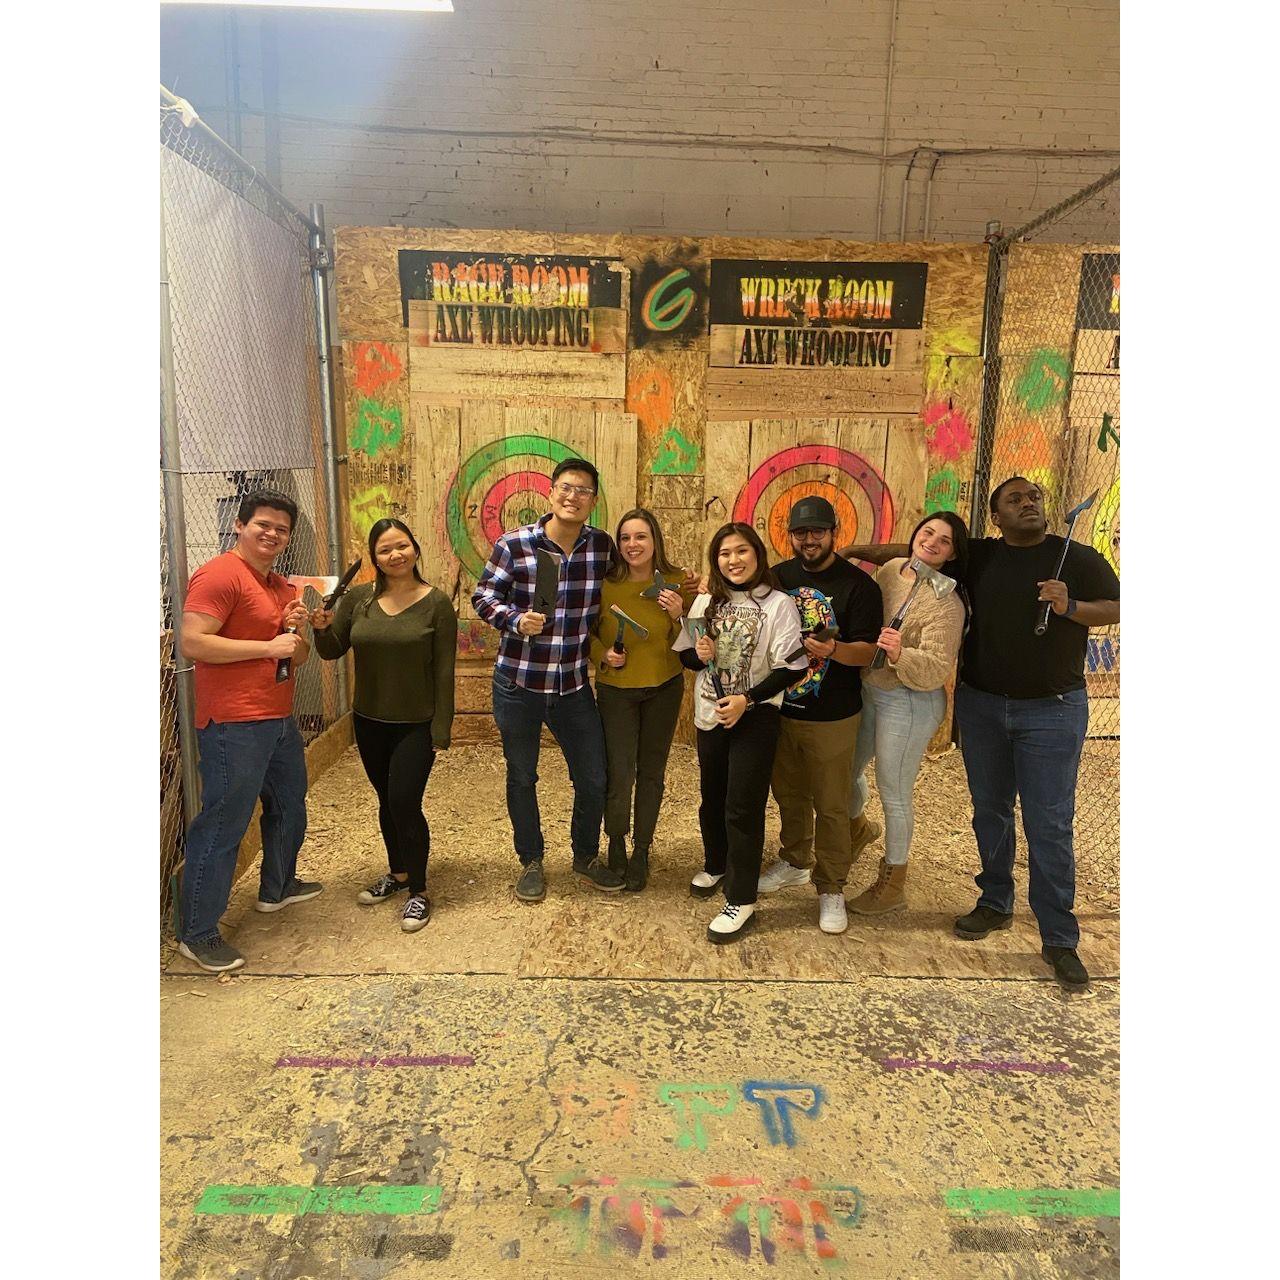 We went ax throwing with a group of friends. Taylor was scary good 😅